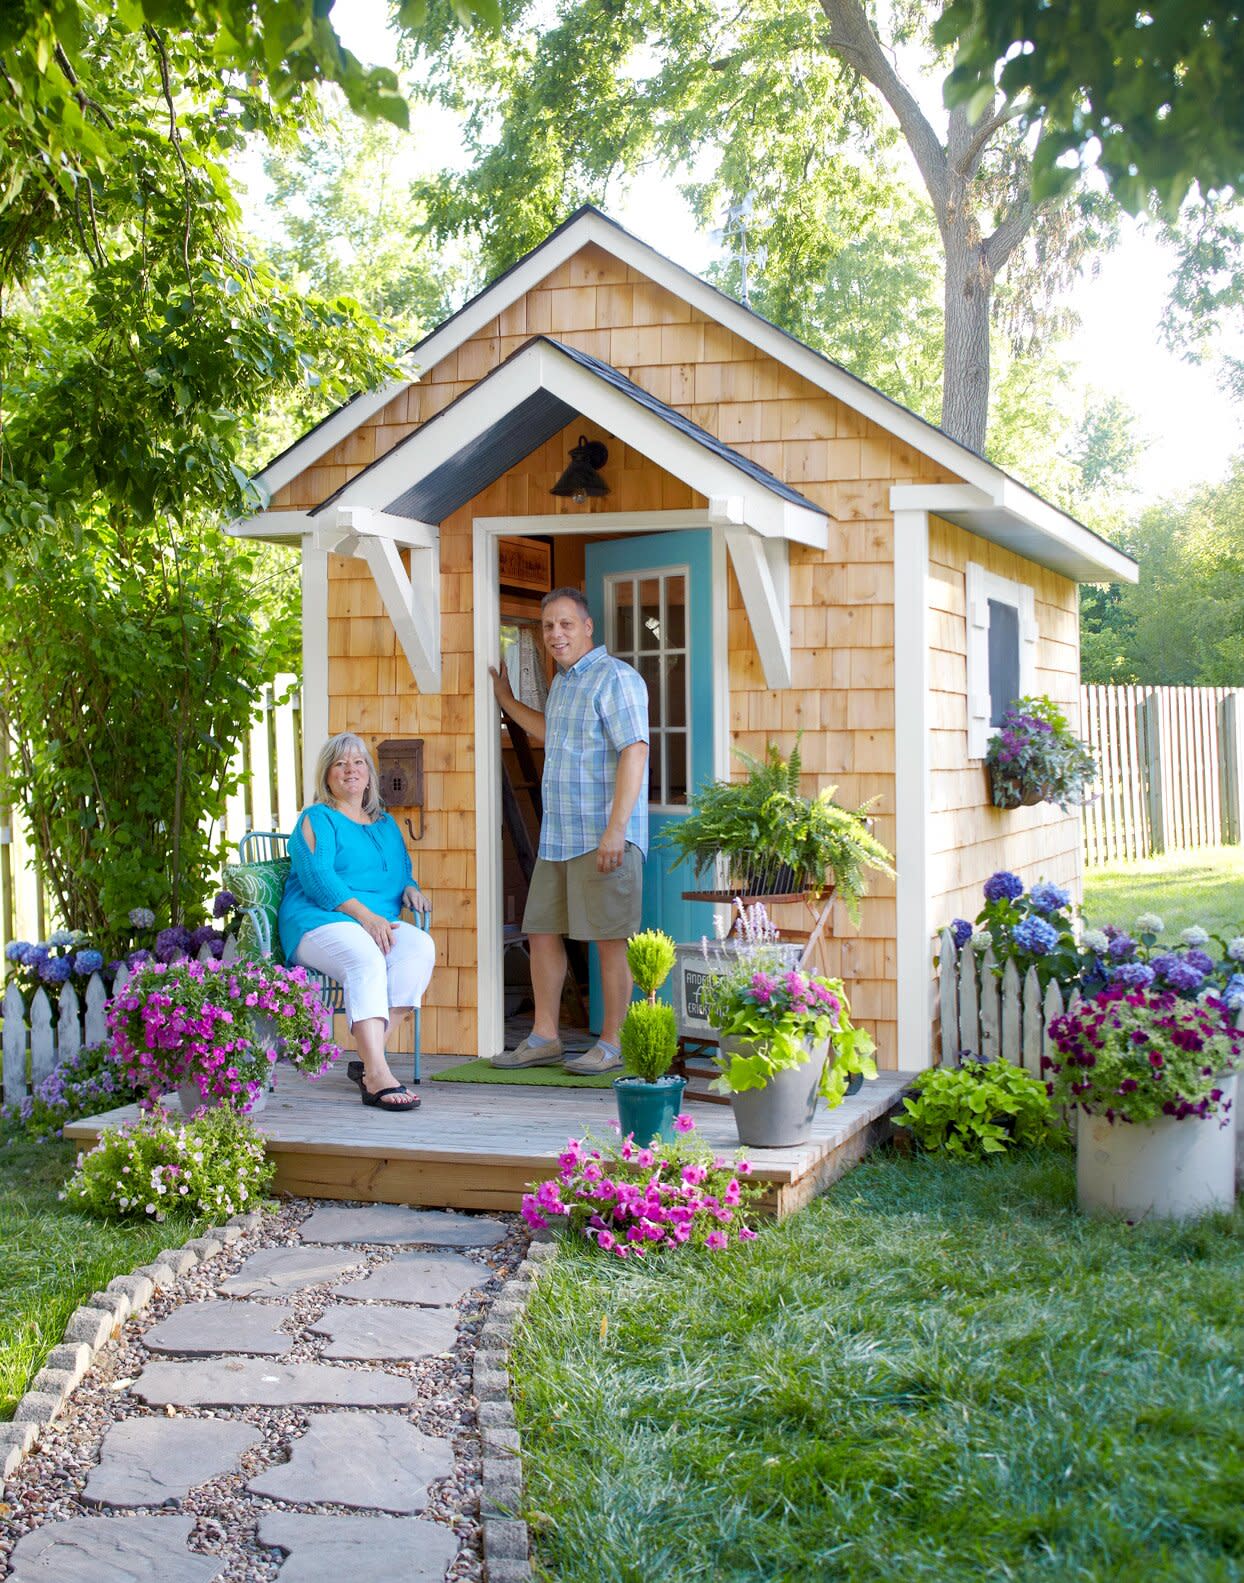 This Custom She Shed Is A Tiny Getaway Filled With Cozy Cottage Details 3101